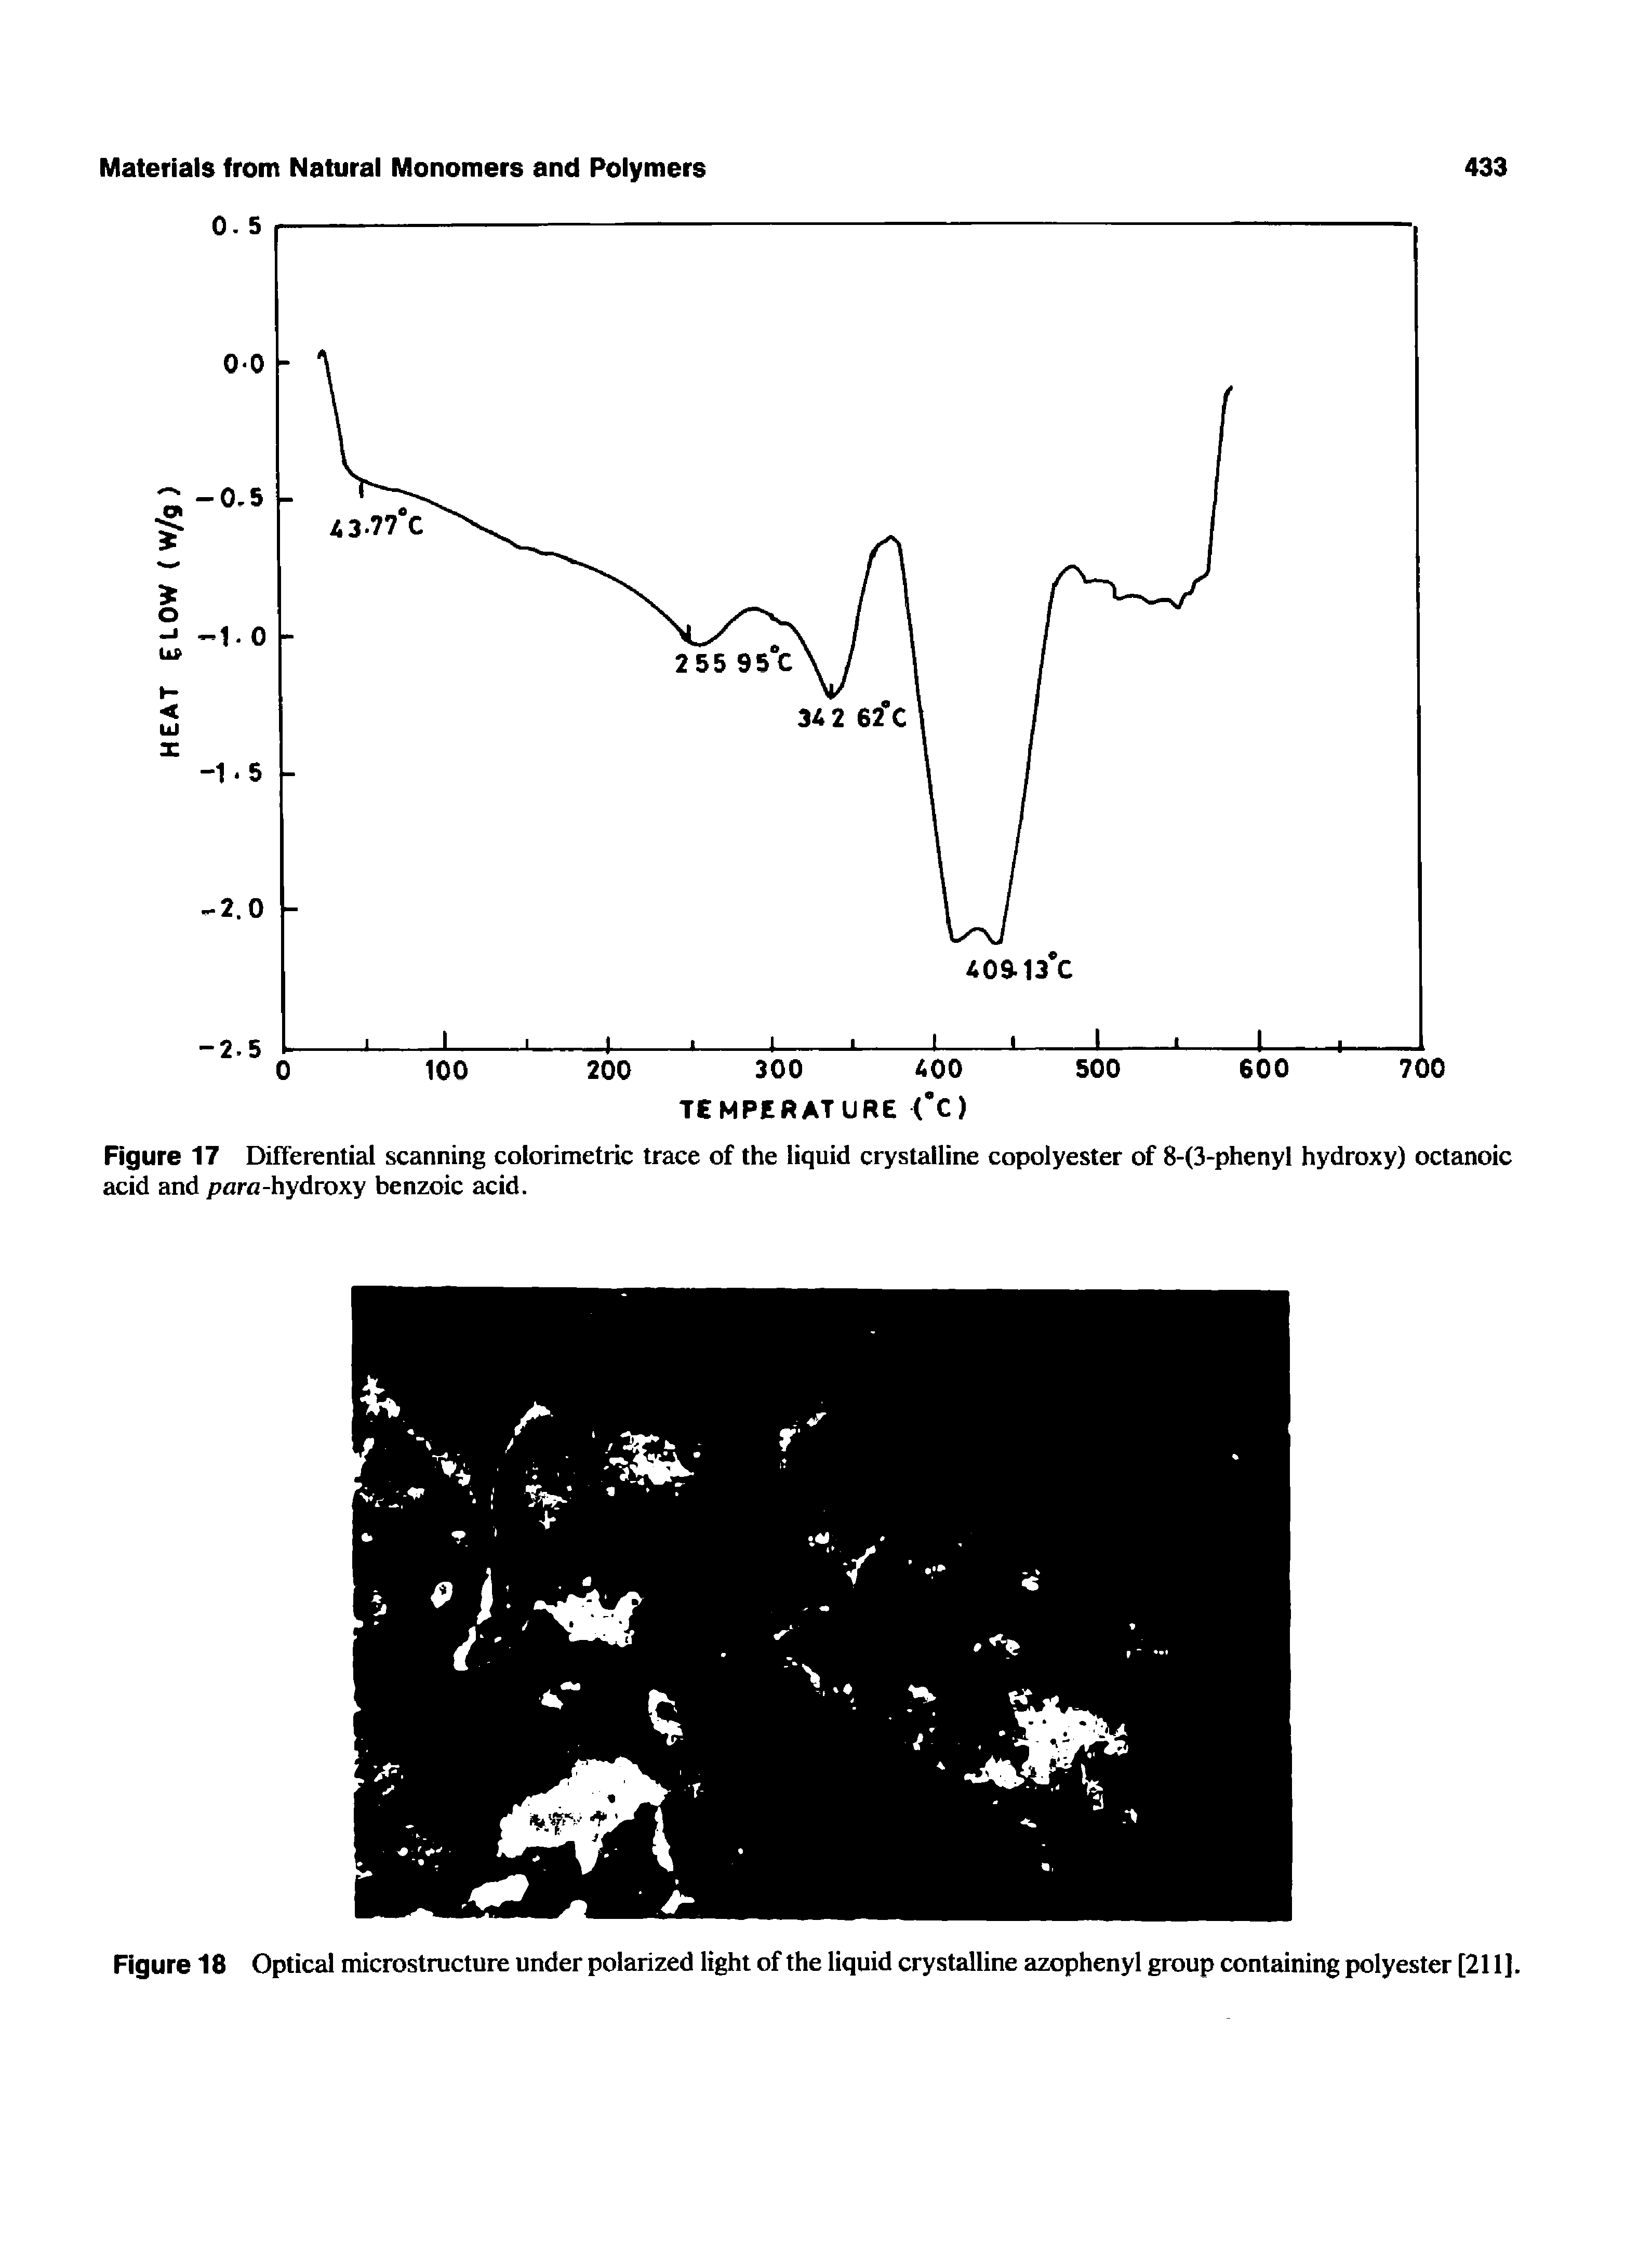 Figure 17 Differential scanning colorimetric trace of the liquid crystalline copolyester of 8-(3-phenyl hydroxy) octanoic acid and paro-hydroxy benzoic acid.